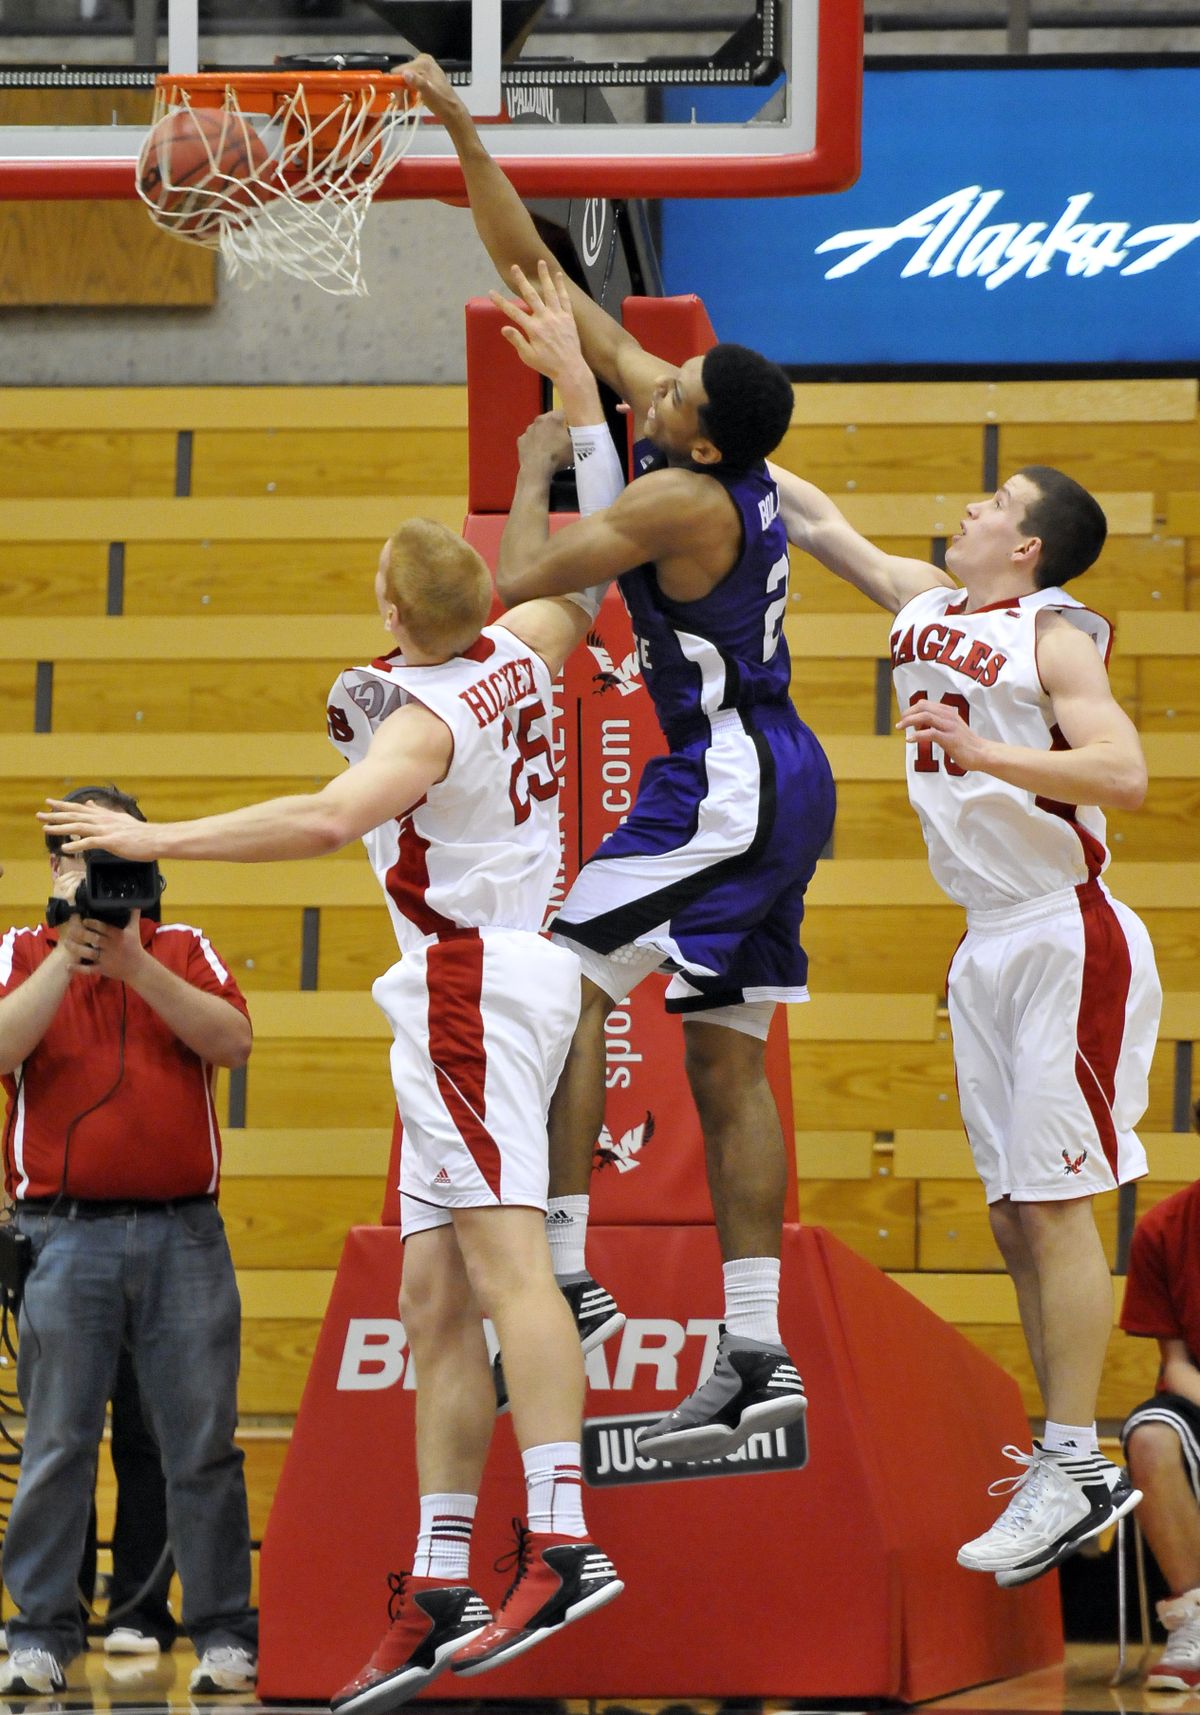 Eagles Jordan Hickert, left, and Parker Kelly can’t stop Weber State’s Joel Bolomboy from slam. (Jesse Tinsley)